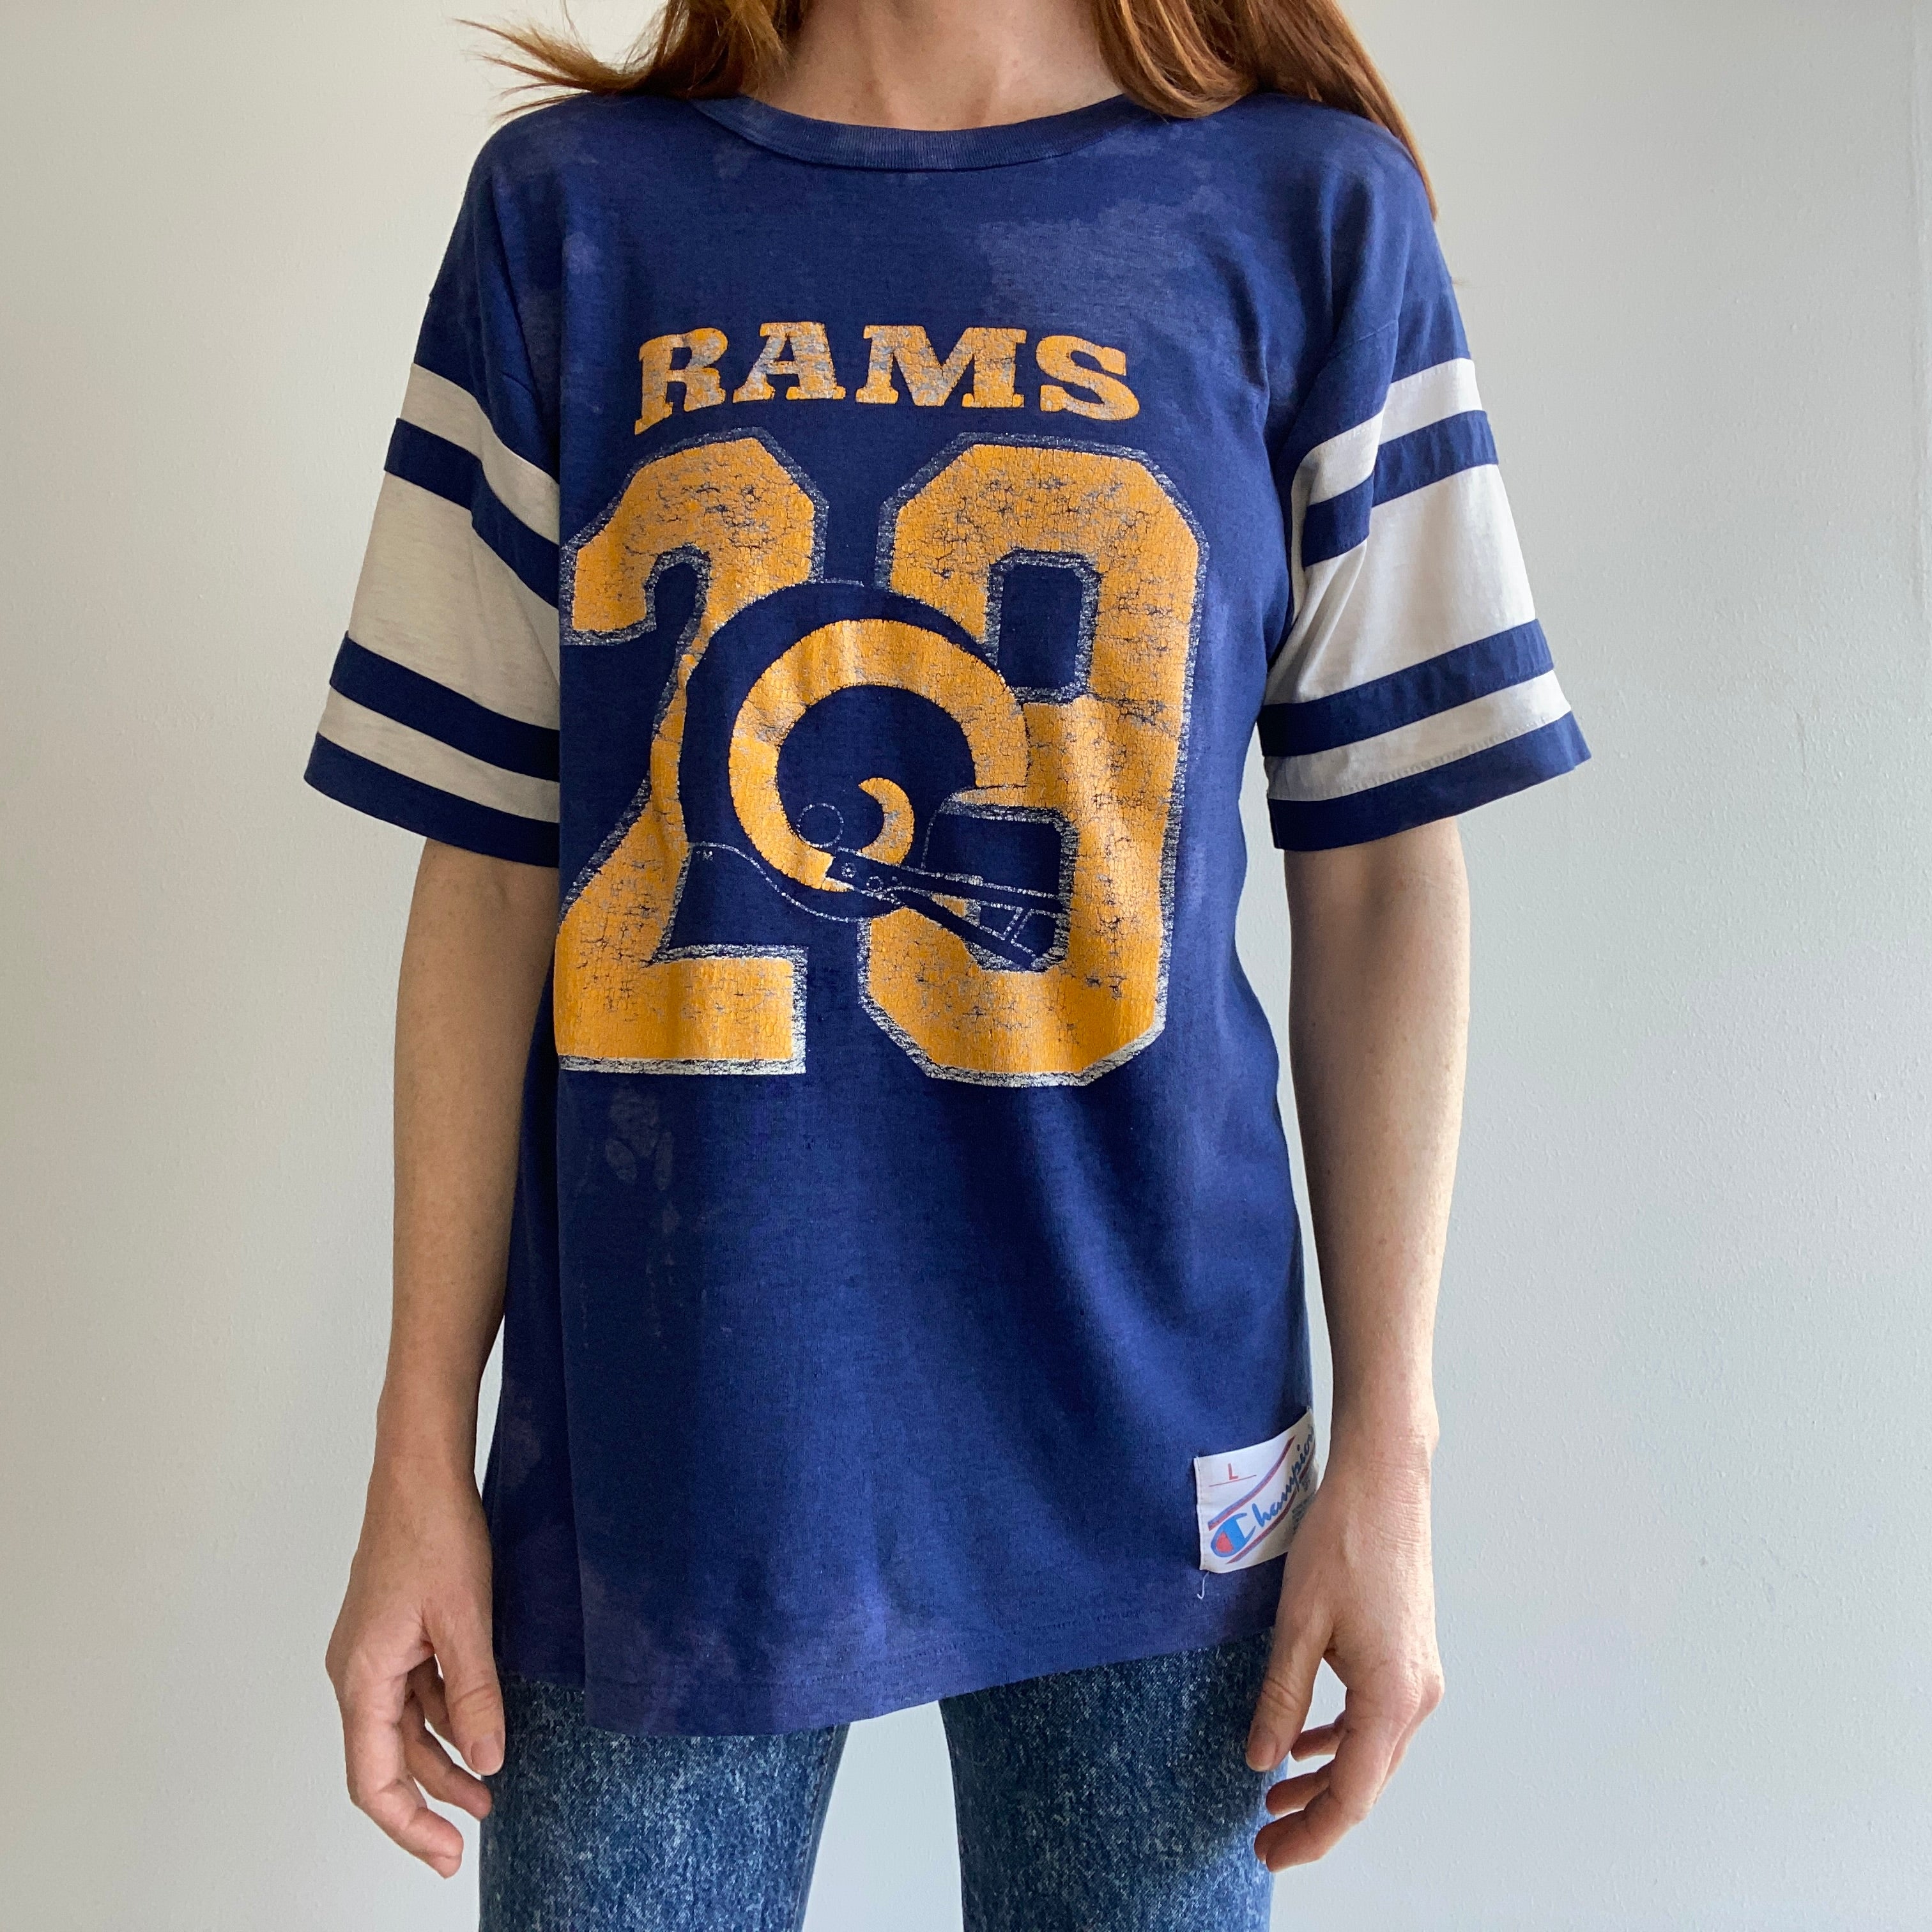 Eric Dickerson Rams 80's Shirt Vintage Deadstock NFL